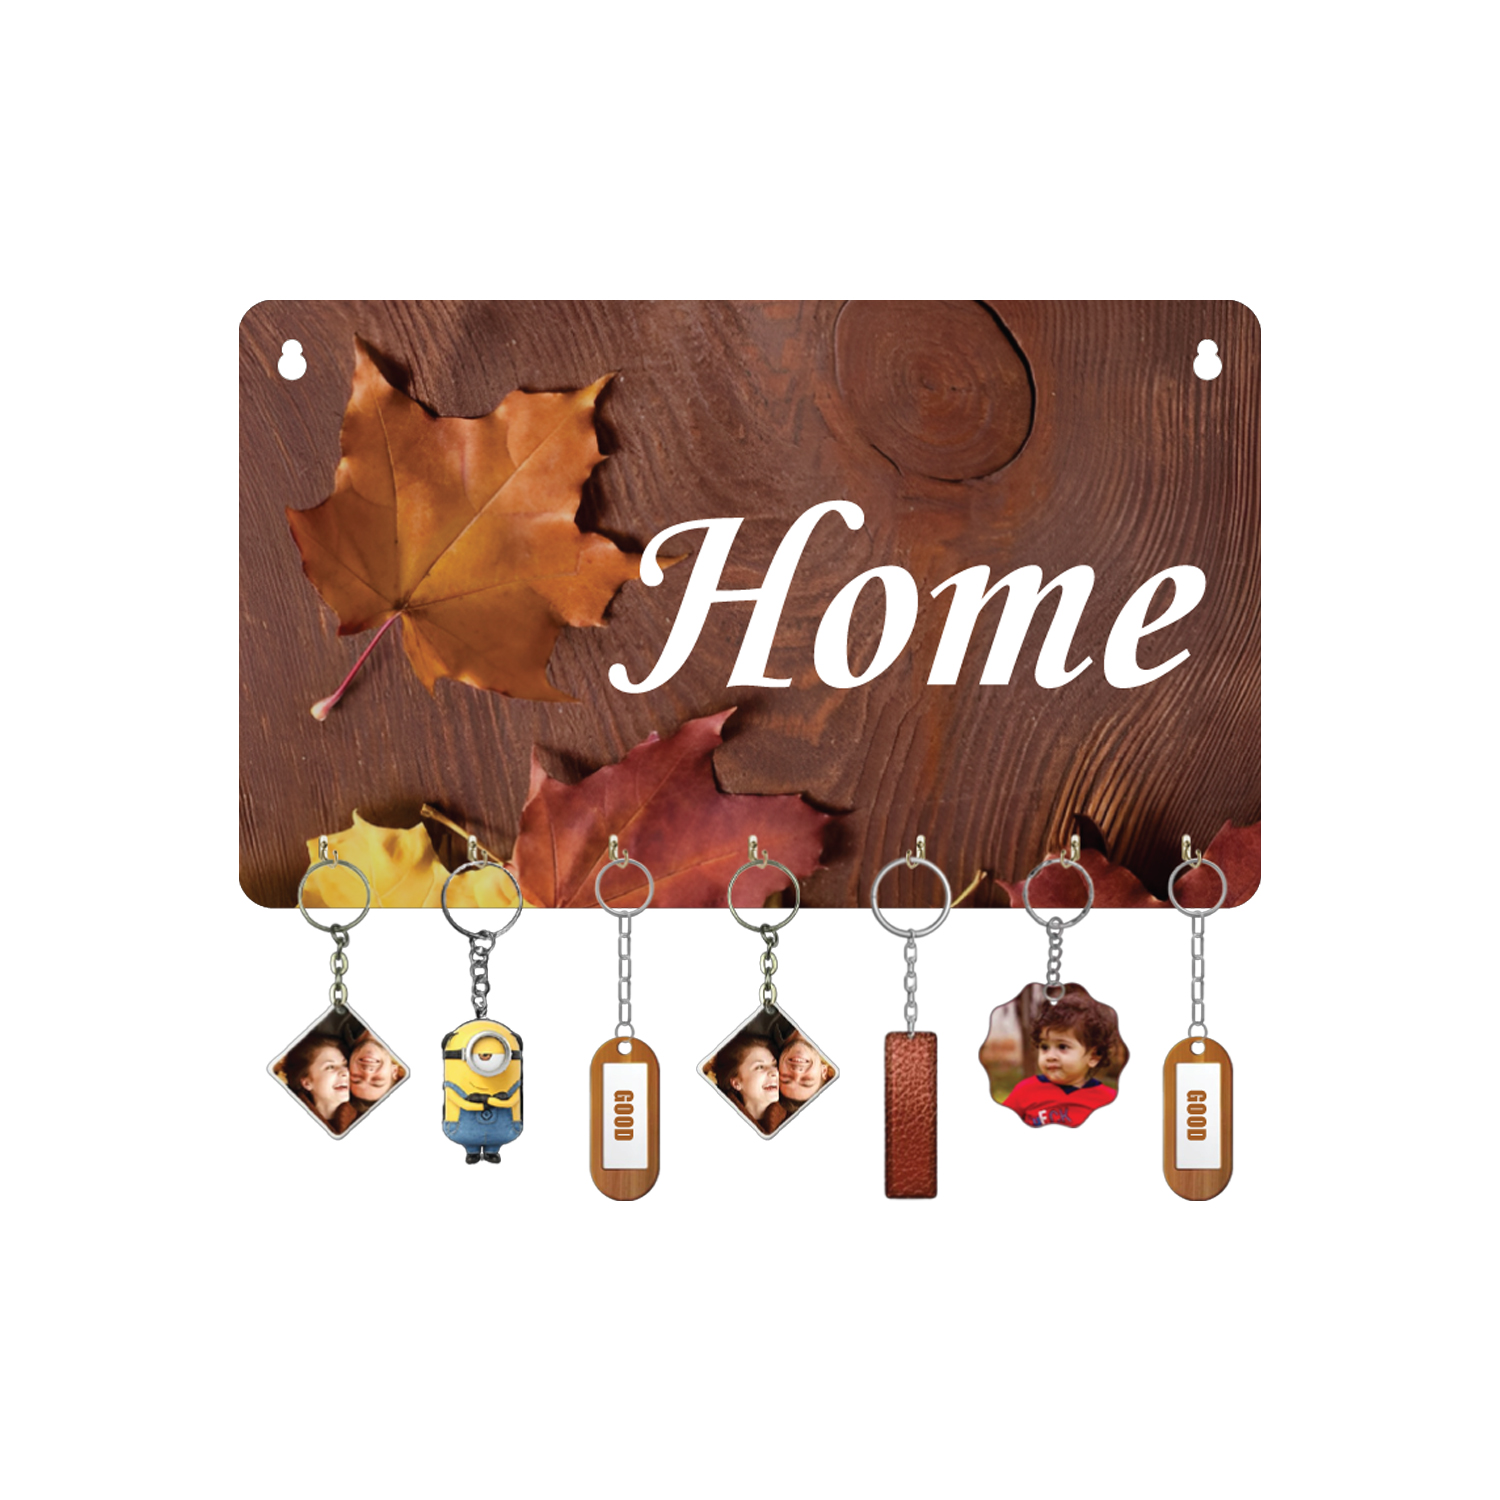 Quirky Home Key Holder For Decor / Living Room